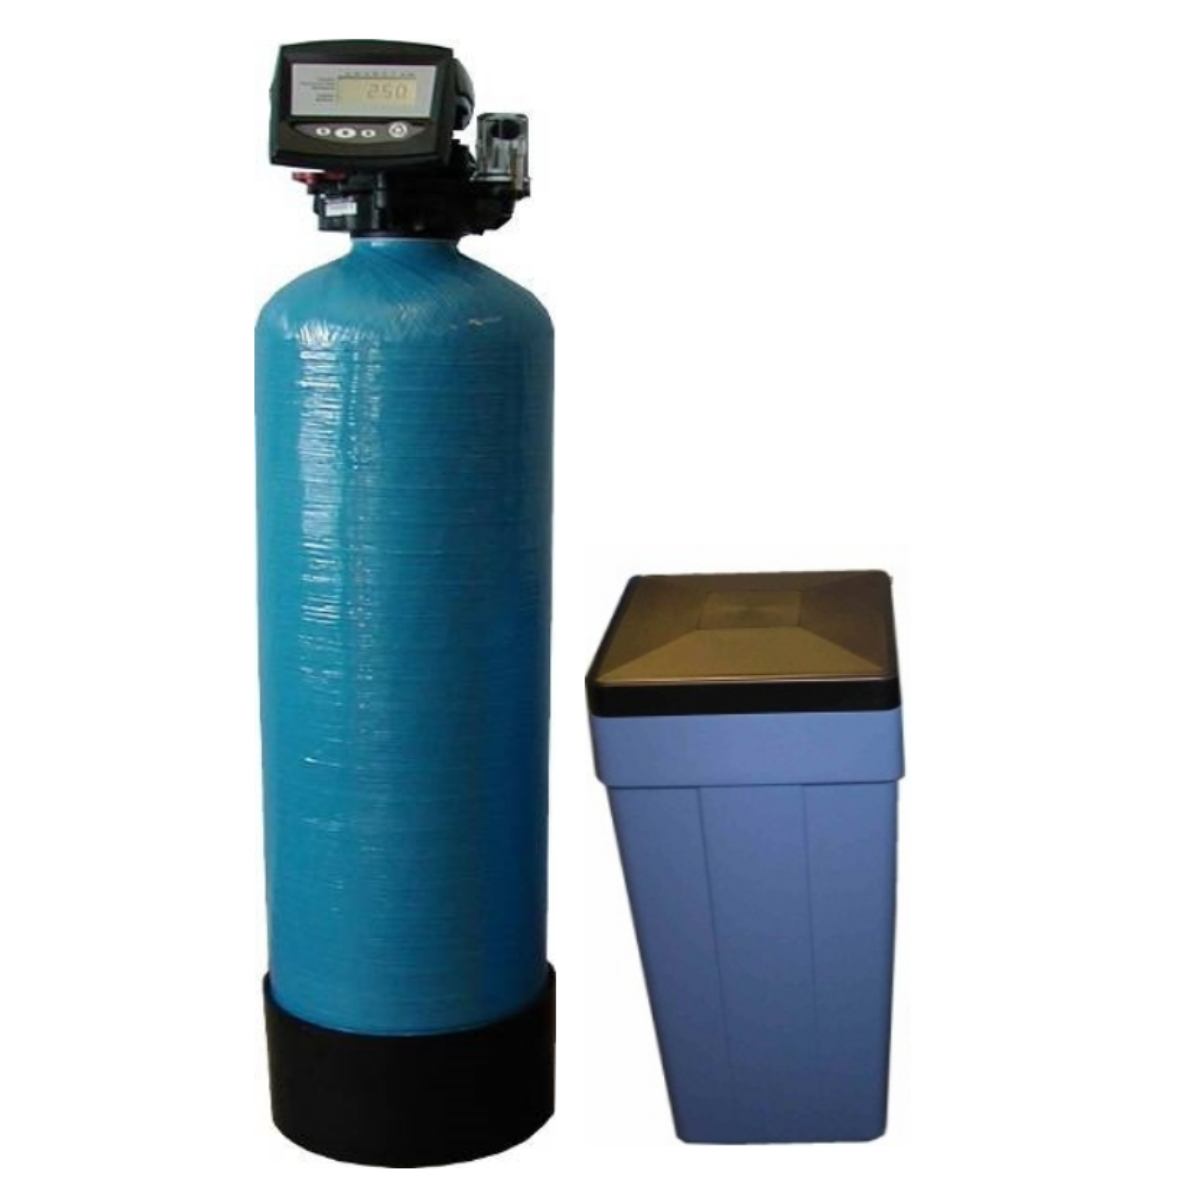 Simplex Autotrol 278 Time Based Controlled Commercial Water Softener 16" x 65", 150 Litres